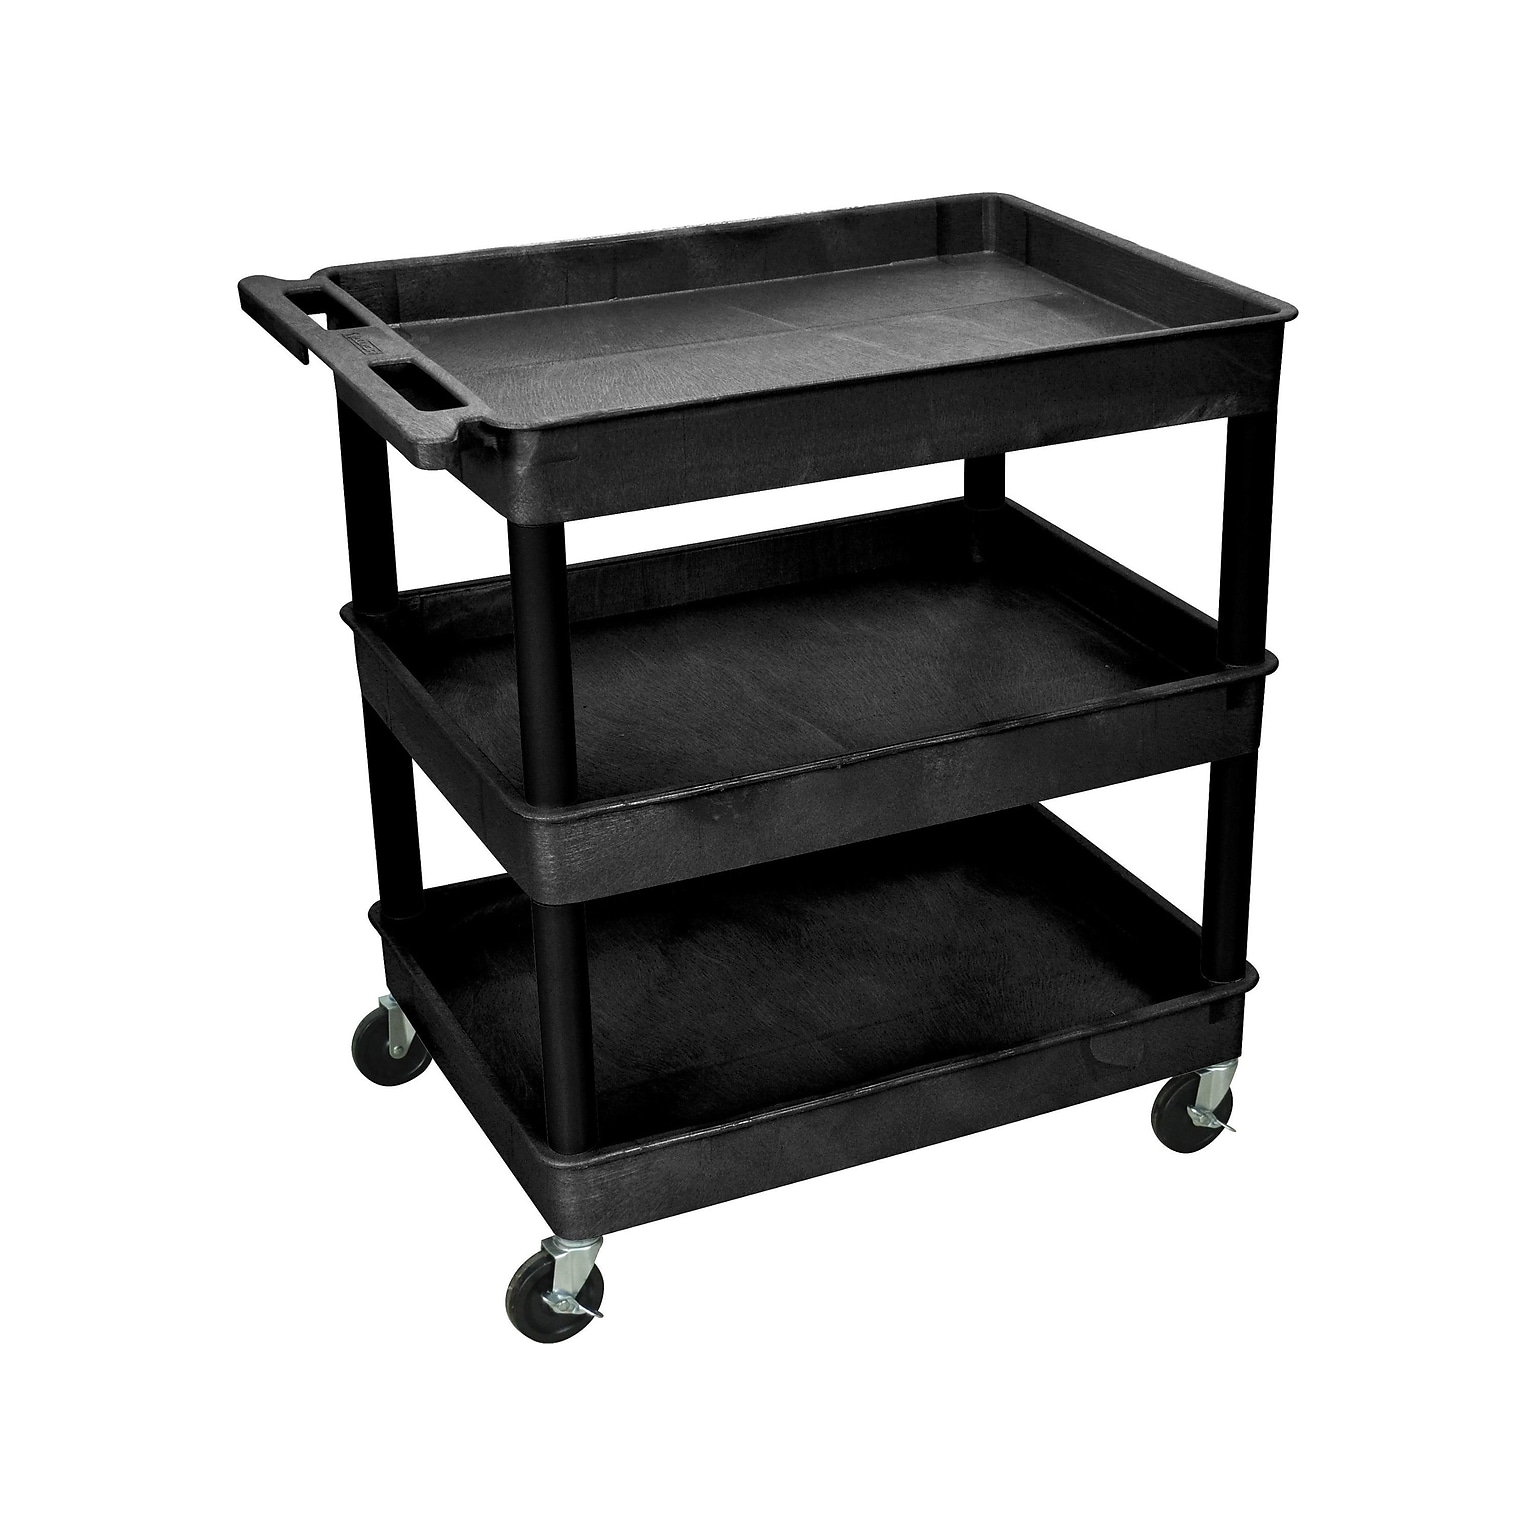 Luxor 3-Shelf Mixed Materials Mobile Utility Cart with Lockable Wheels, Black (TC111-B)